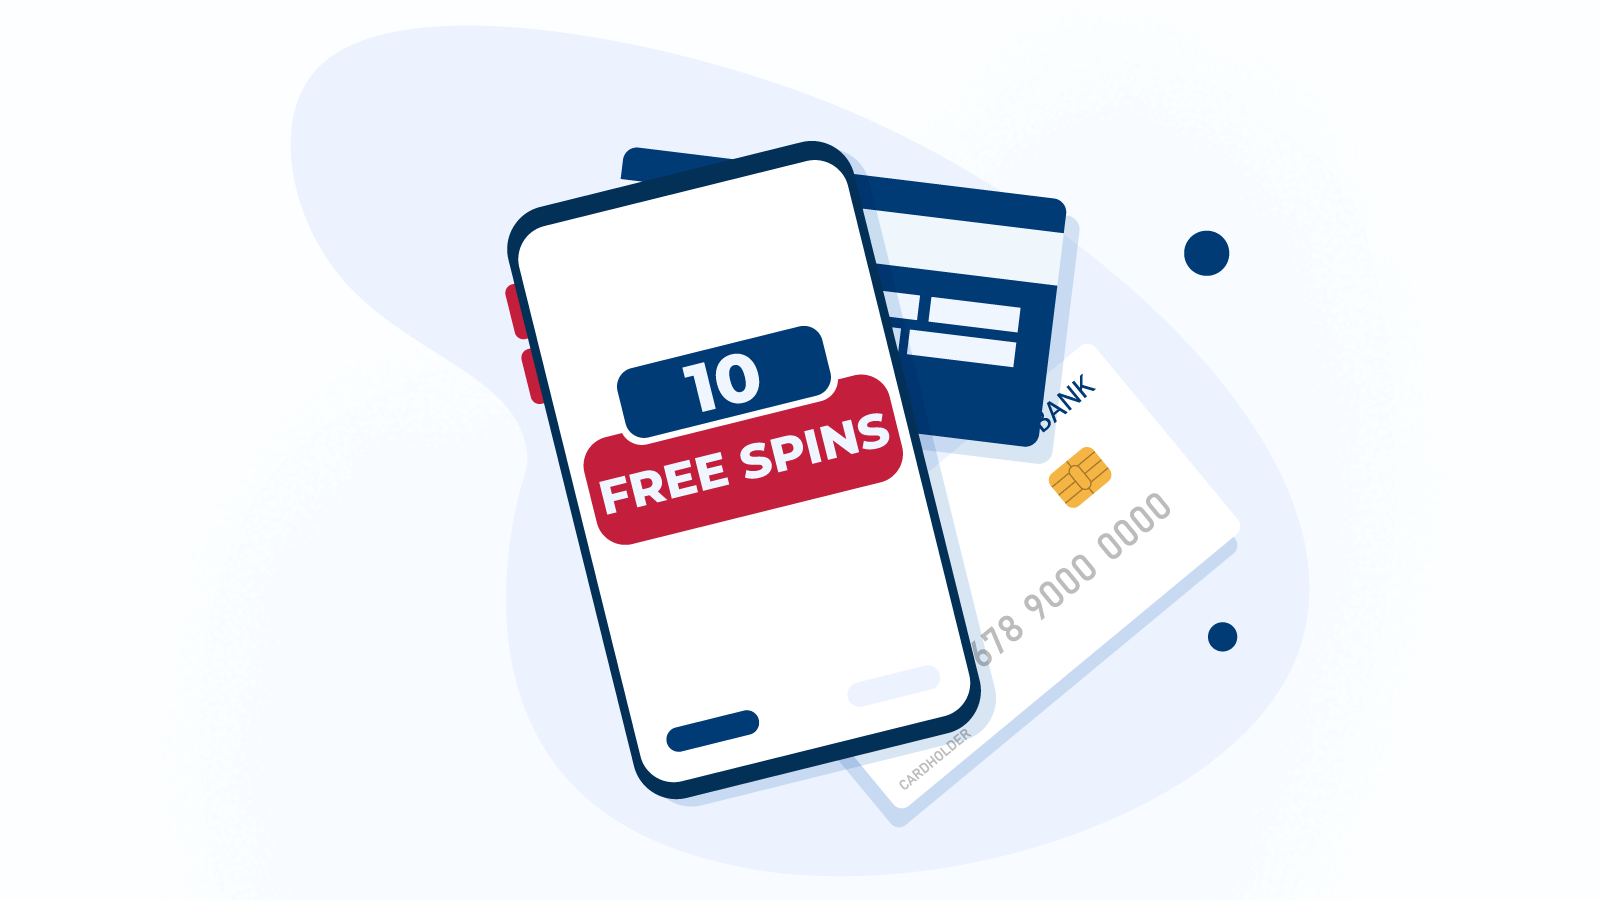 How to Get 10 Free Spins Add Card